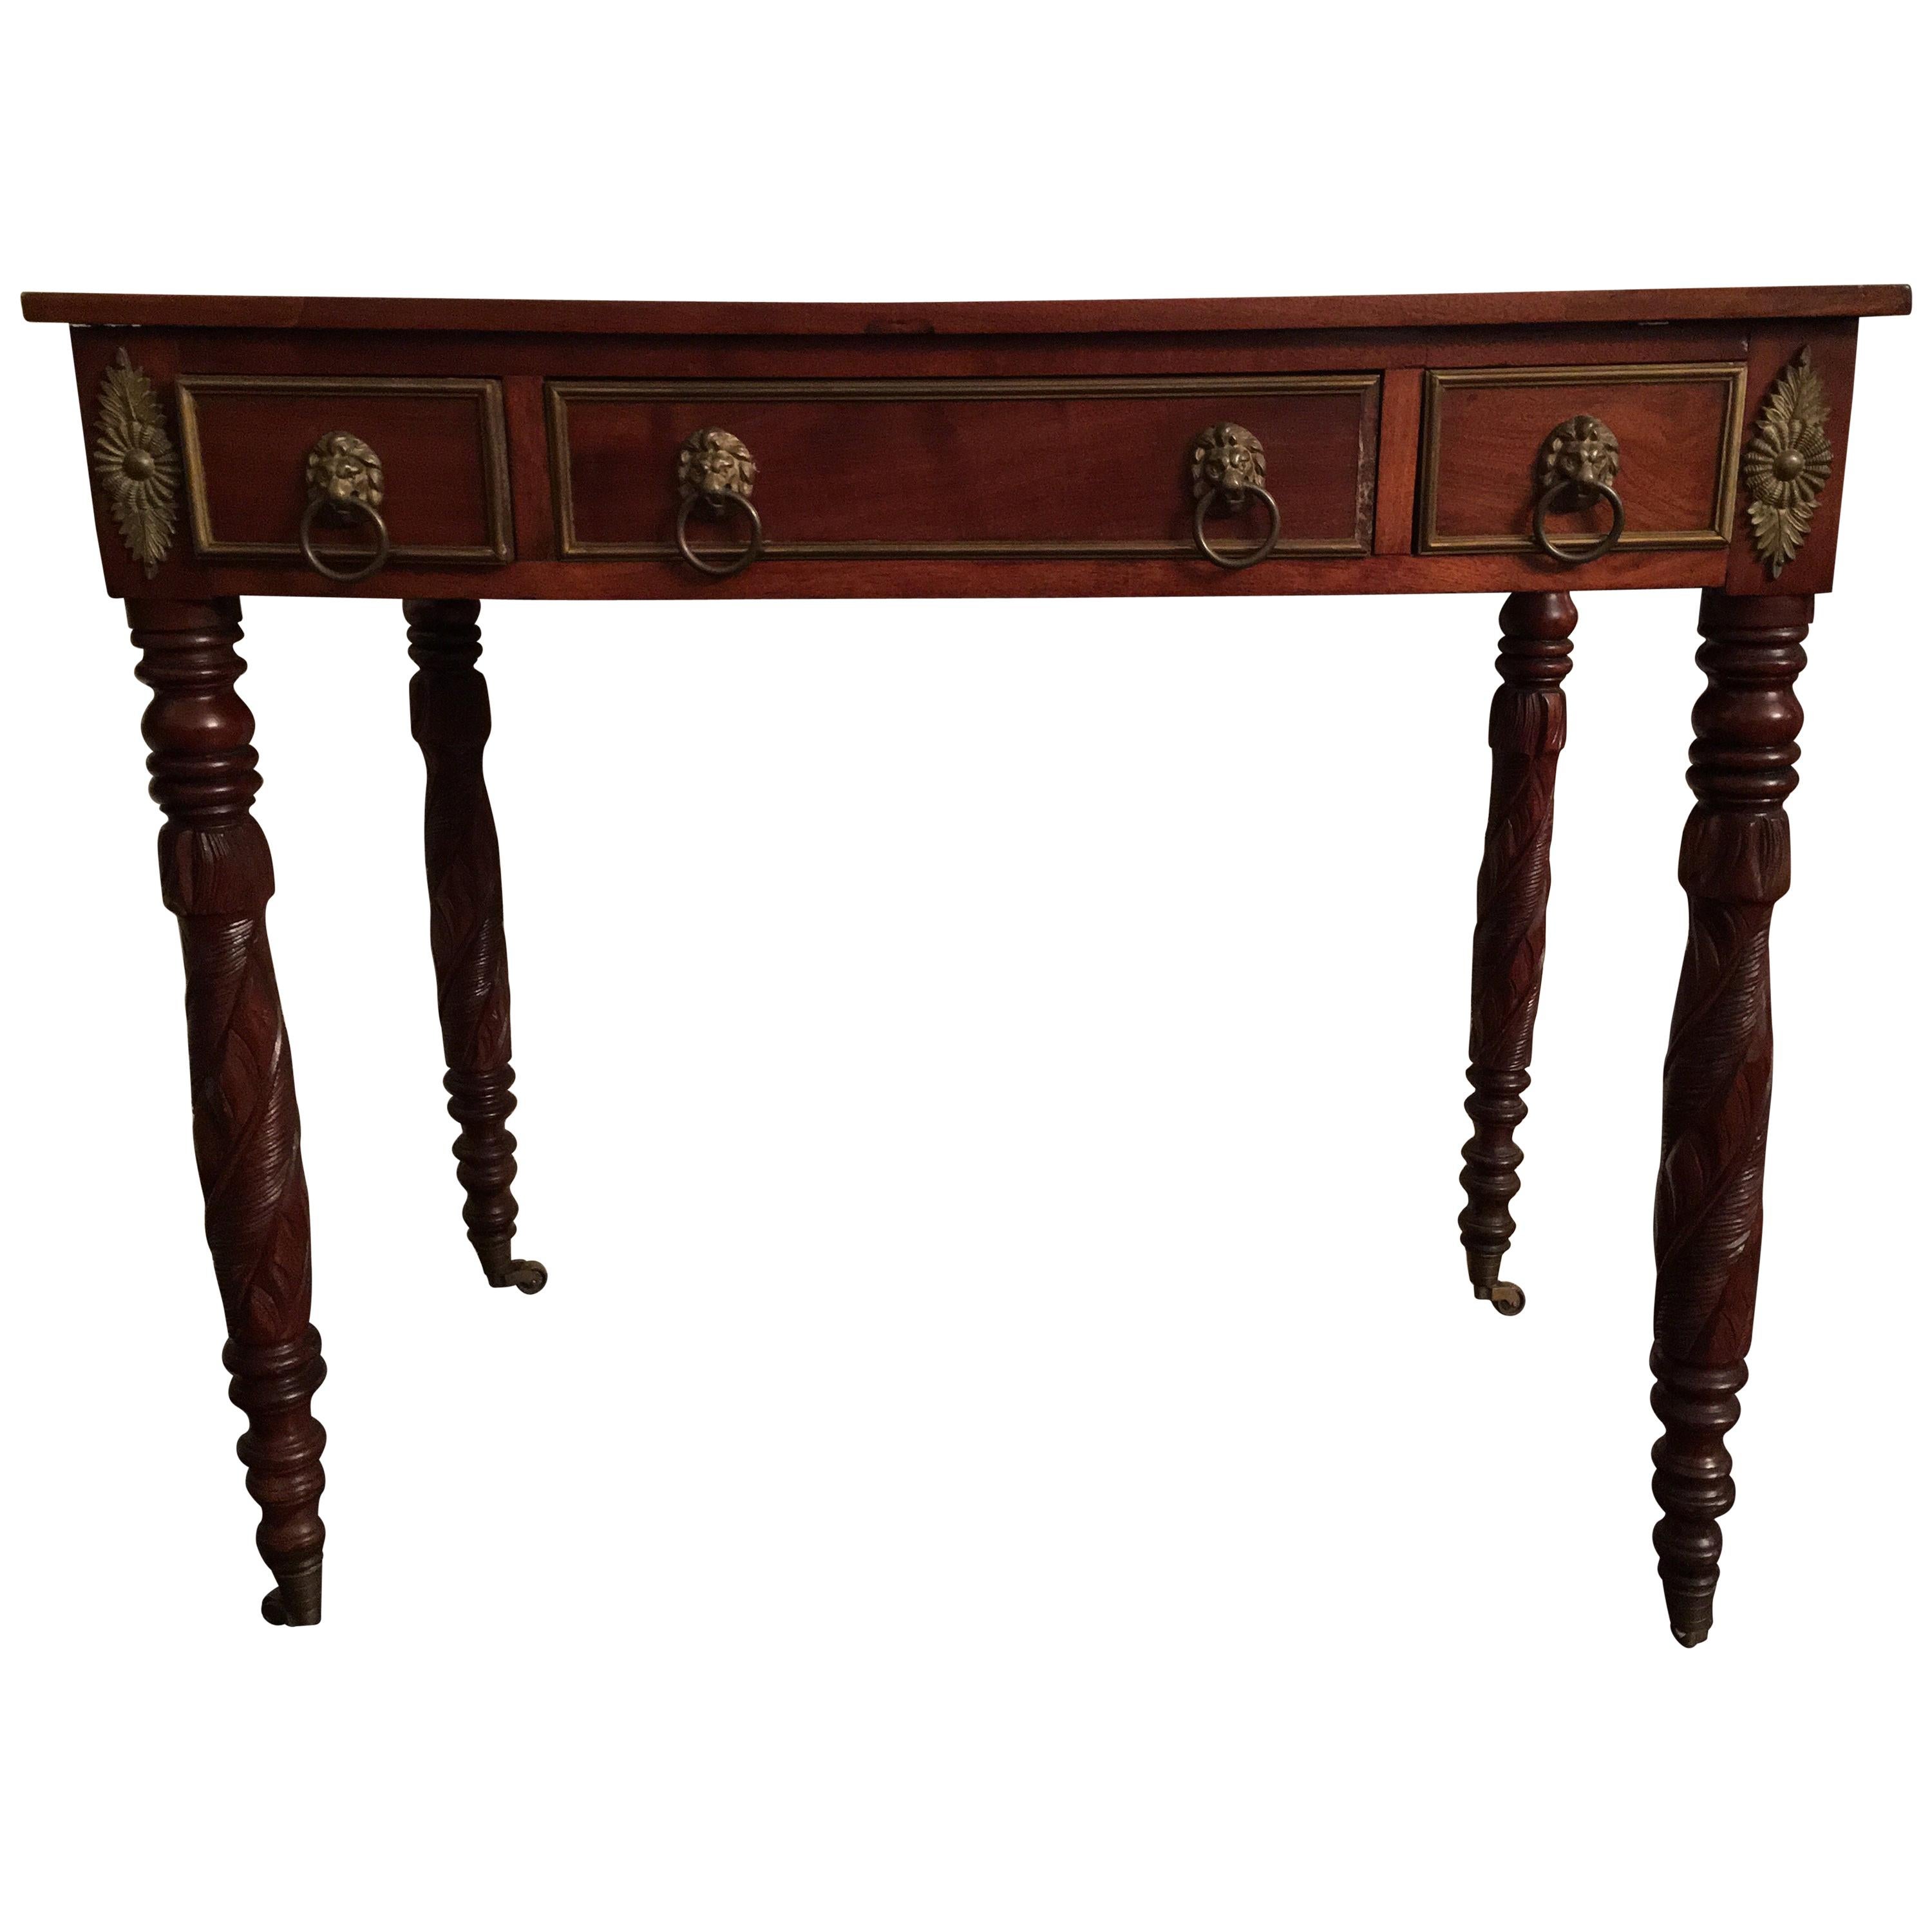 American Empire Writing Table with Carved Acanthus Legs, circa 1840